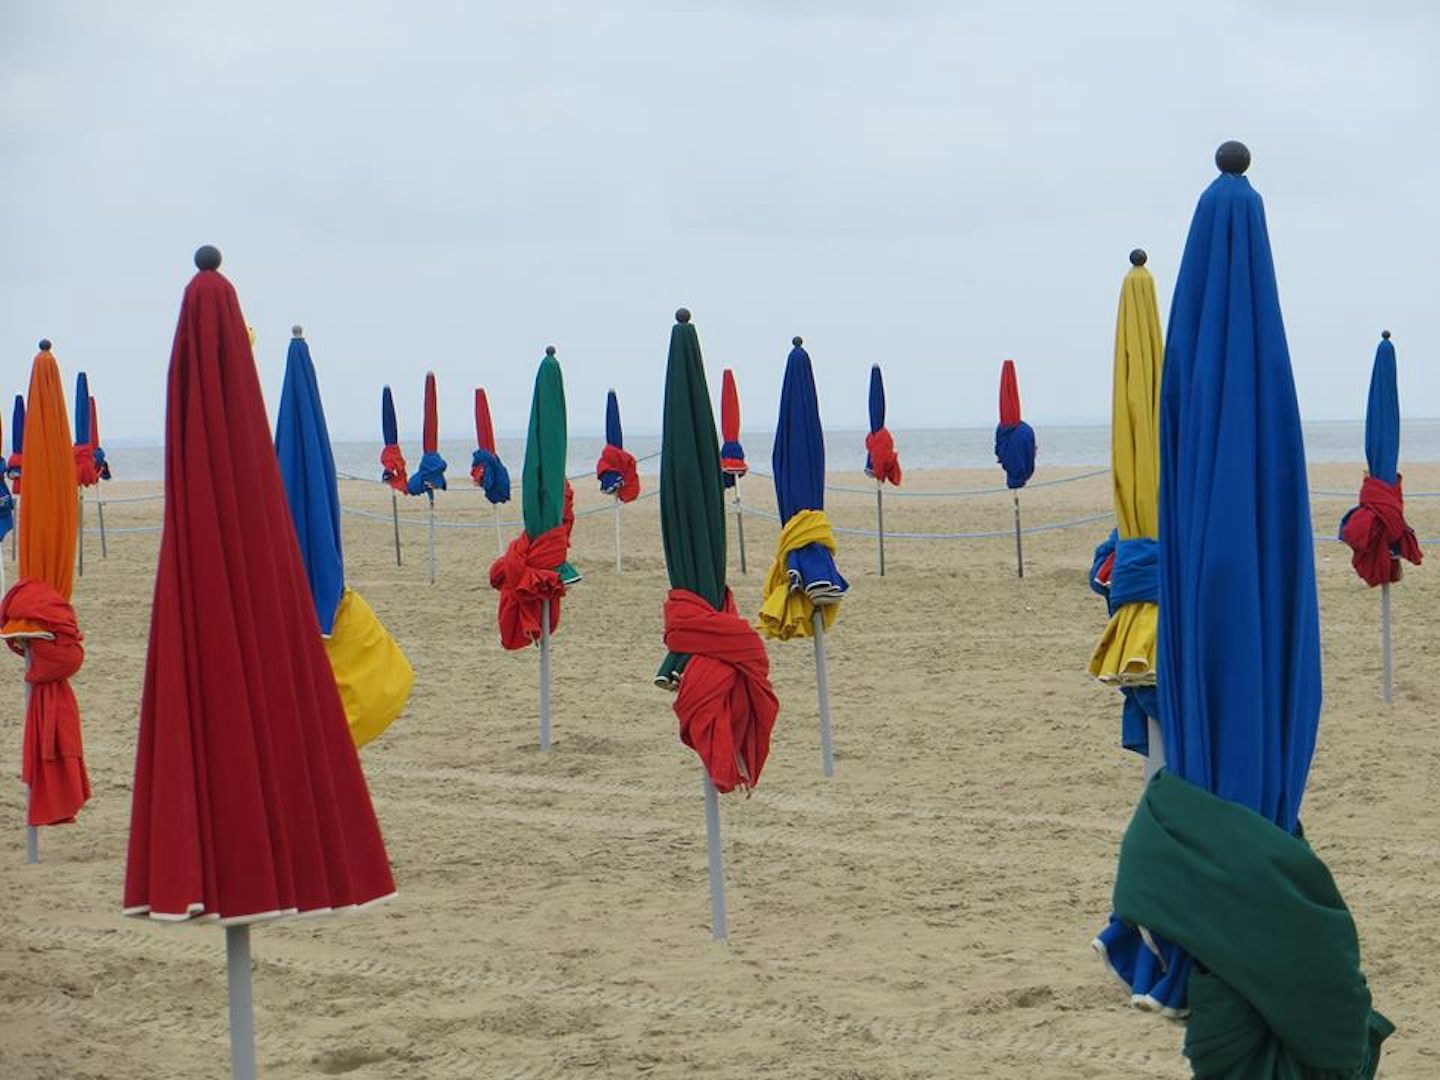 Deauville-historically the site for beachside holidays of the rich and famous